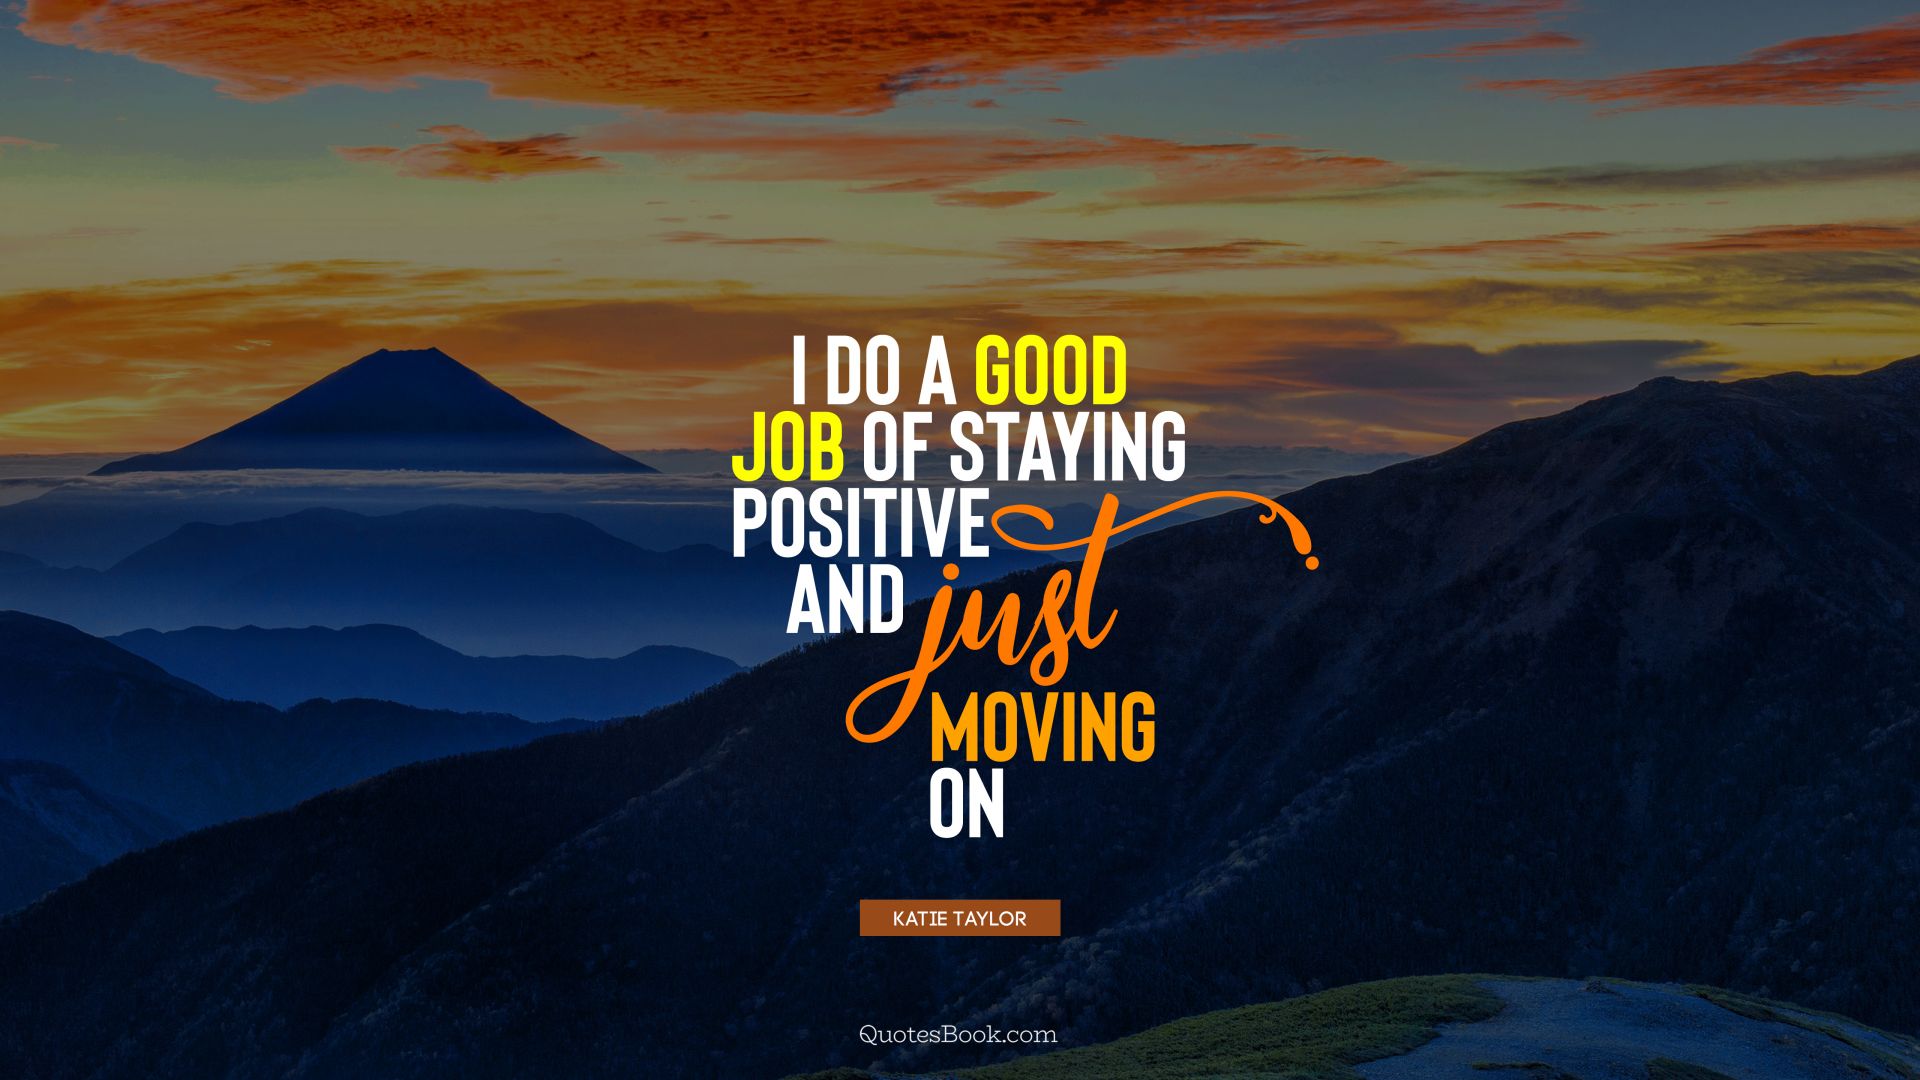 I do a good job of staying positive and just moving on. - Quote by Katie Taylor